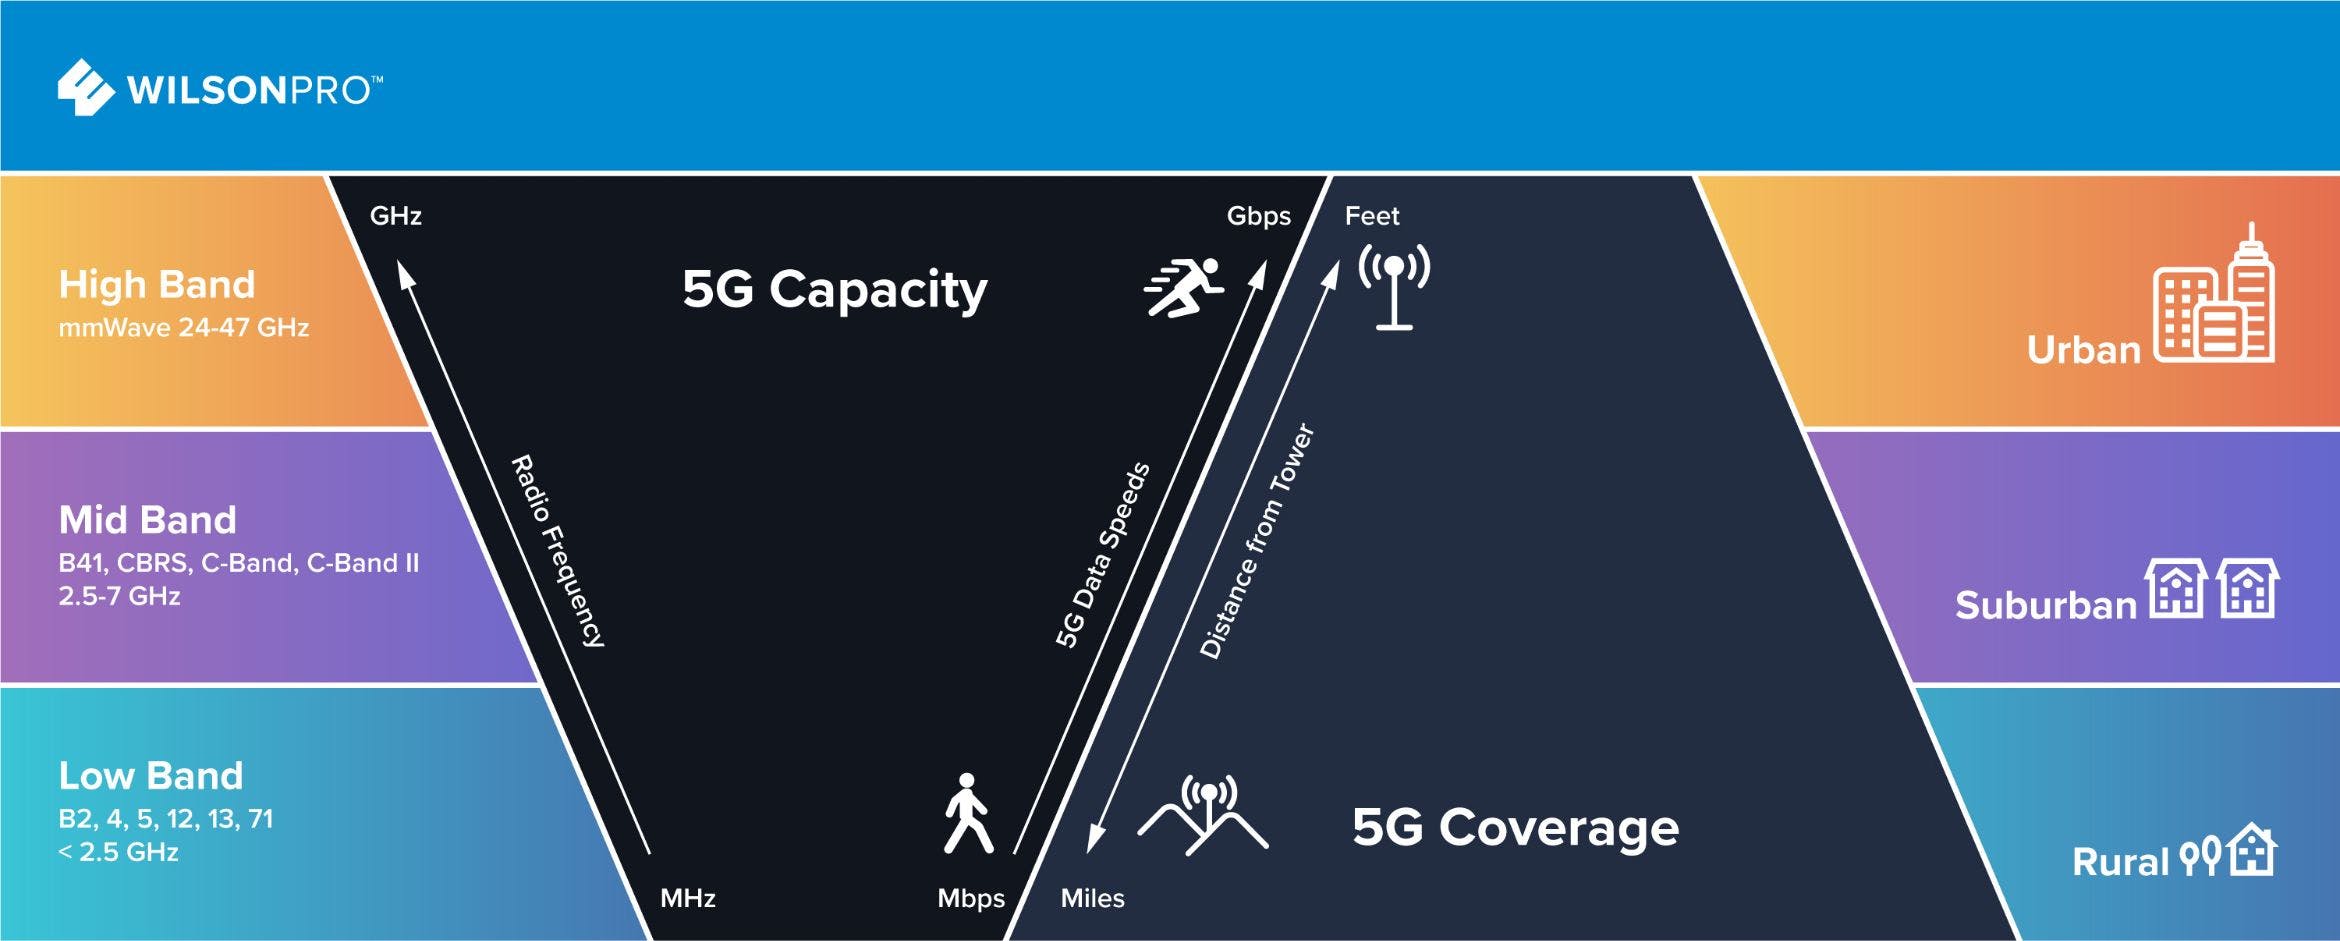 5g repeaters - 5g solutions - WilsonPro